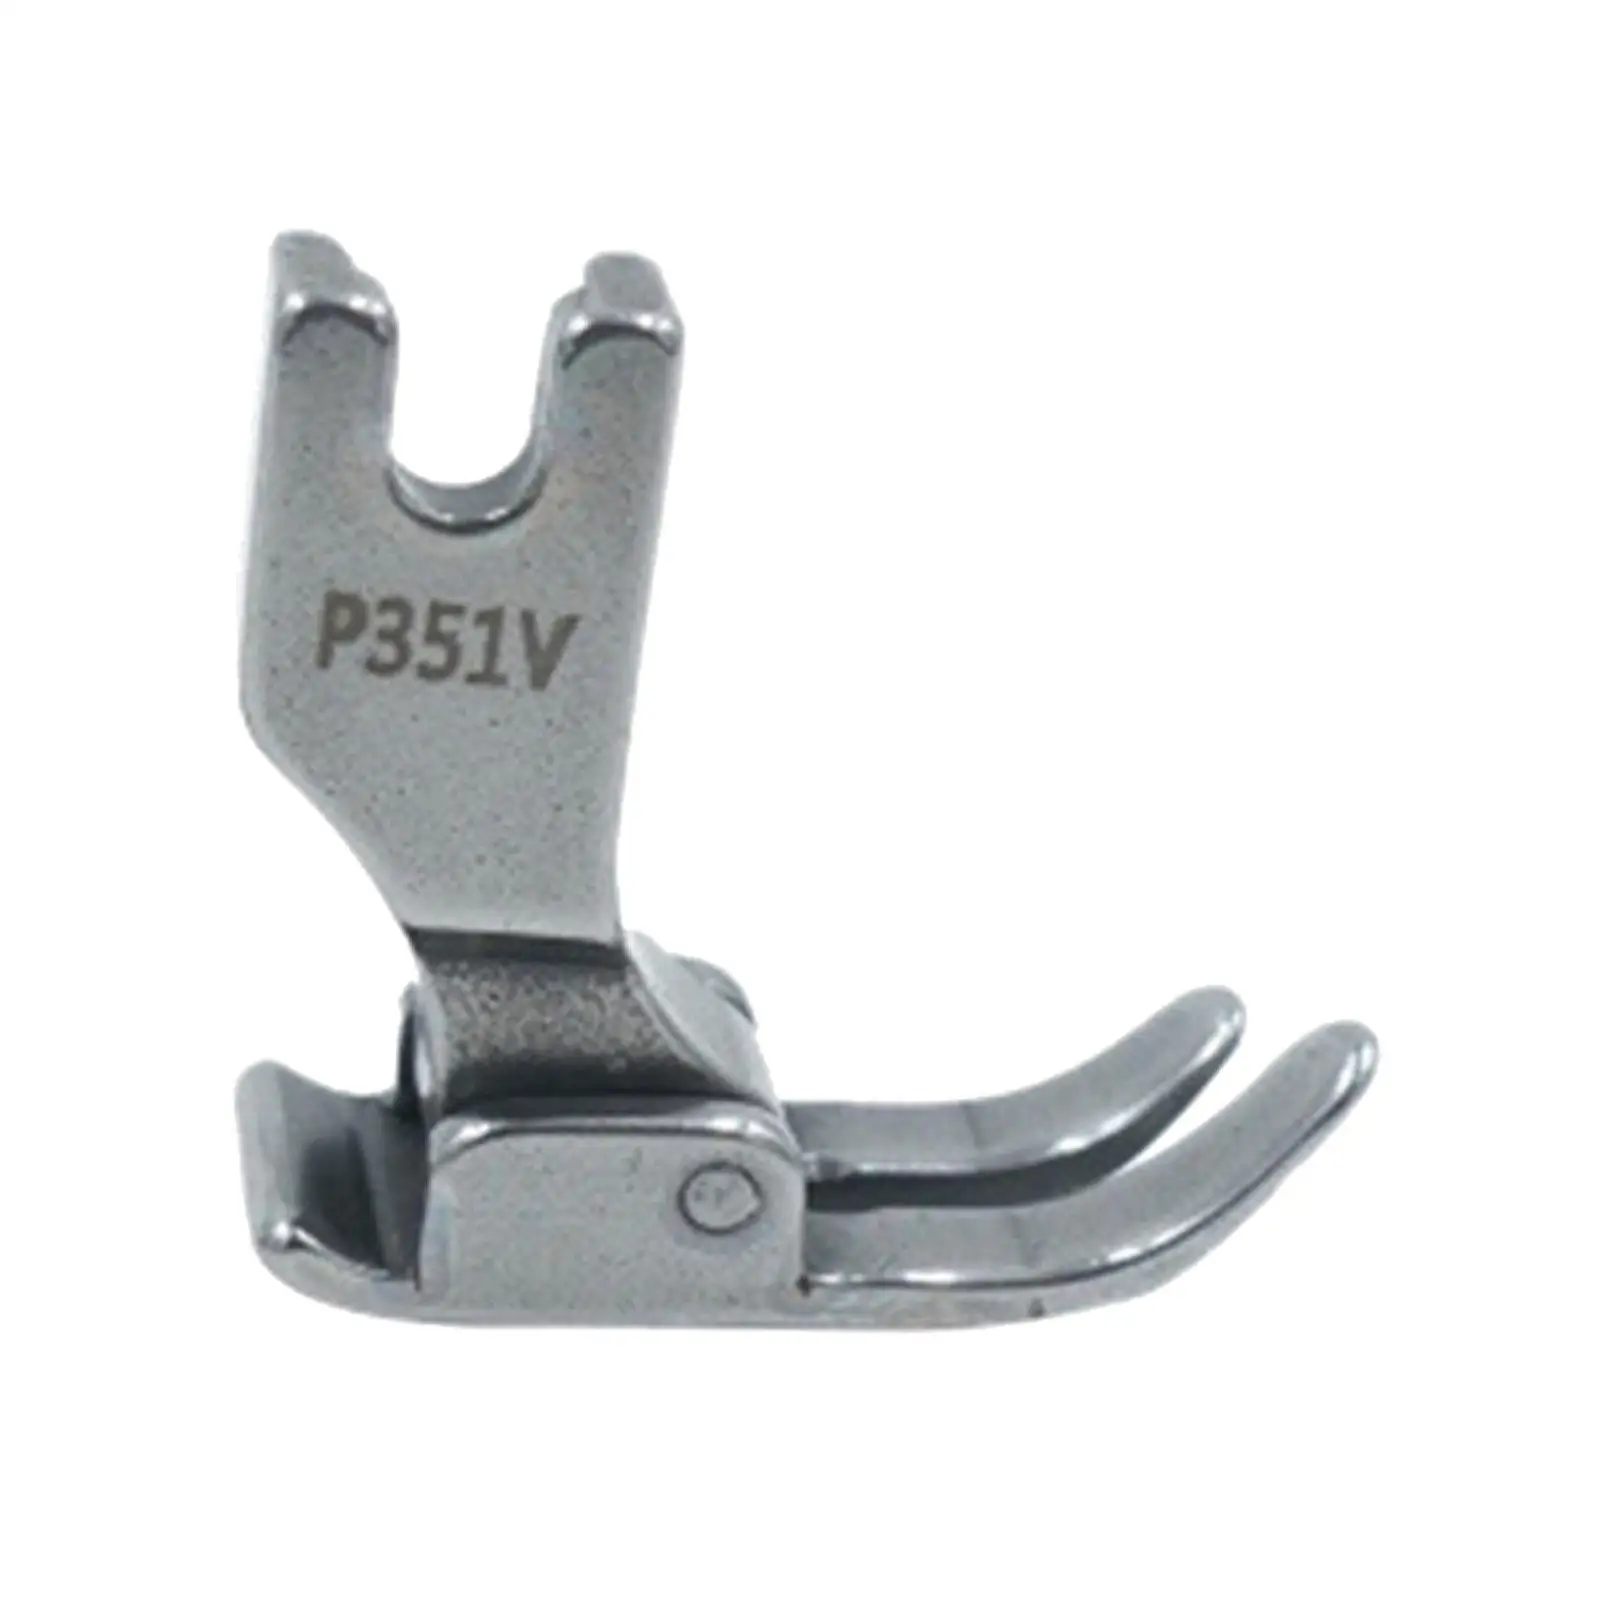 Standard Presser Foot Stitch Foot Easy to Use Guide Foot for Juki Stitching